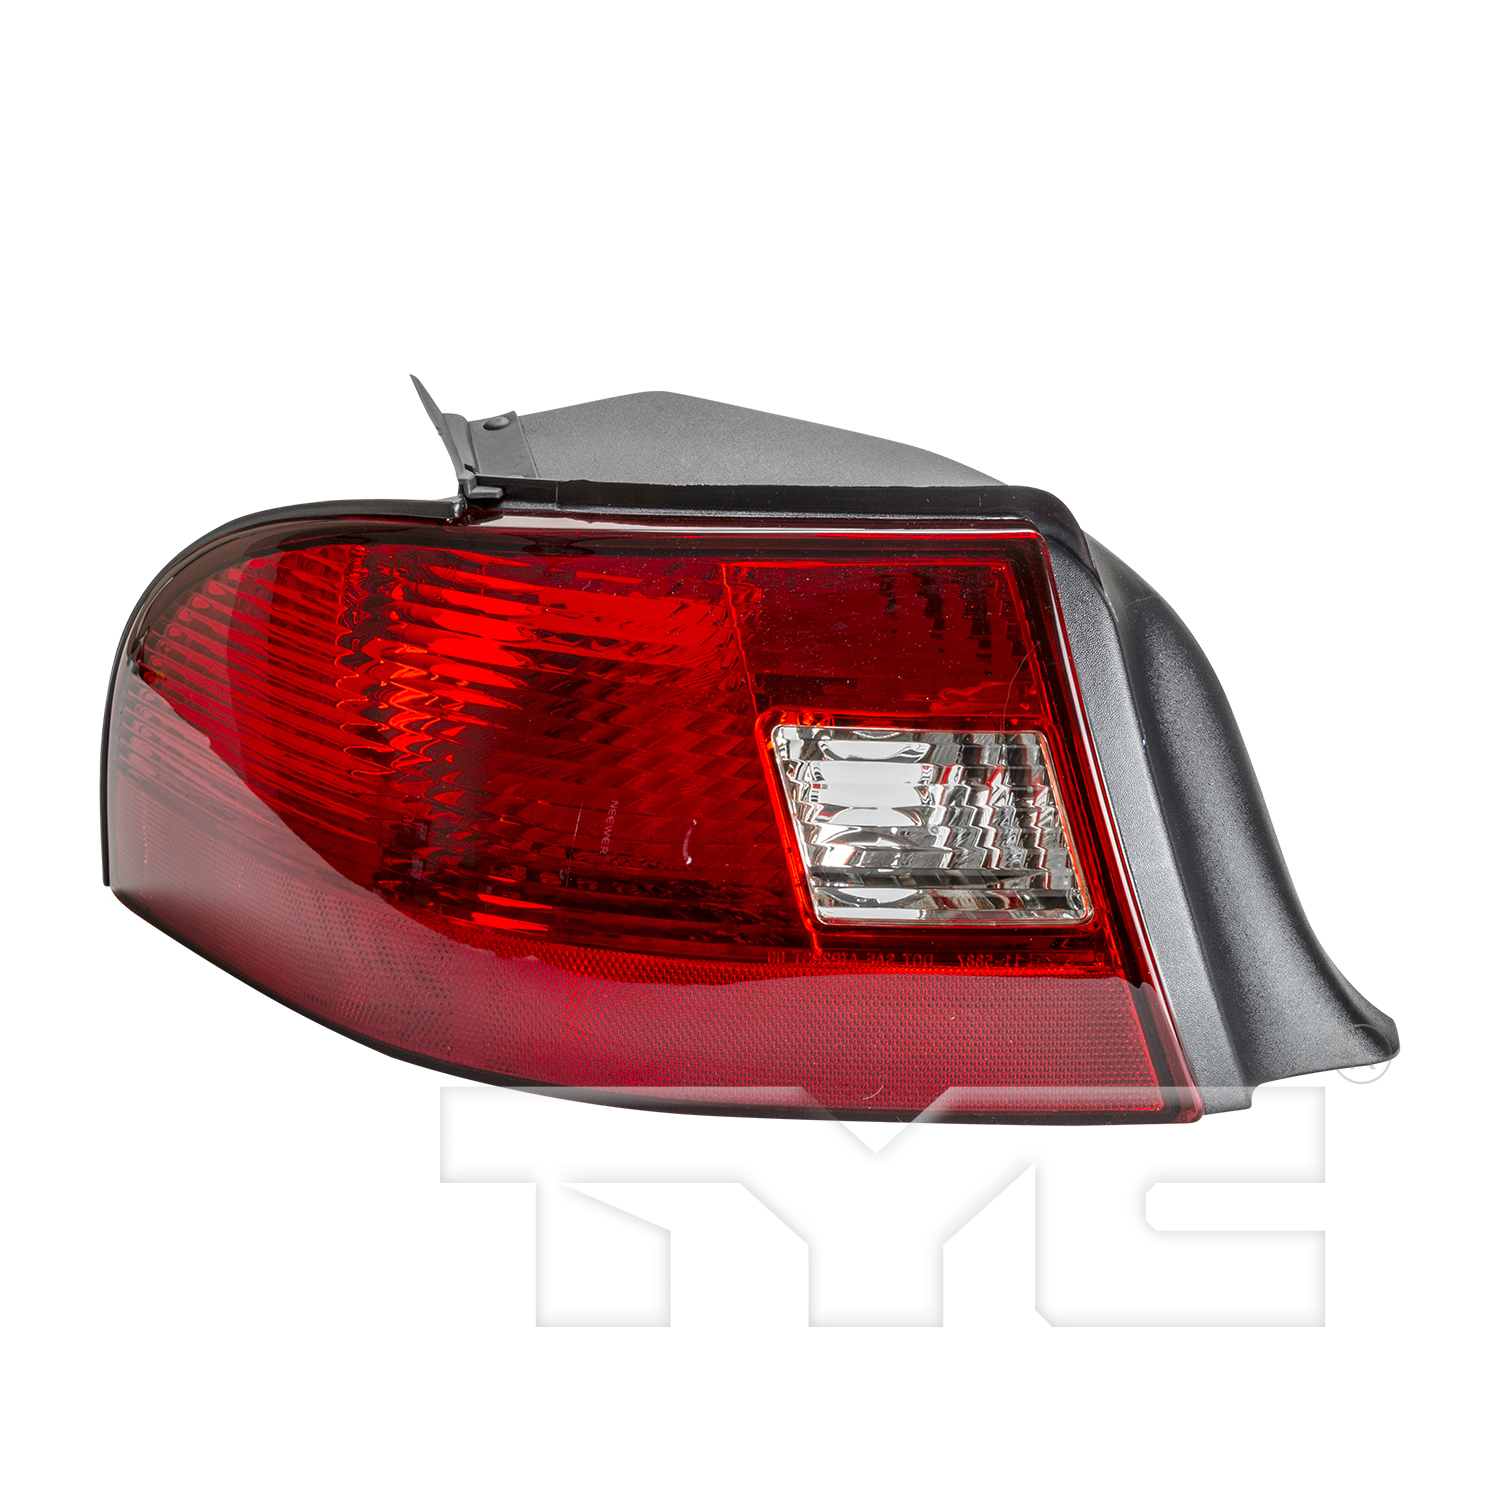 Aftermarket TAILLIGHTS for MERCURY - SABLE, SABLE,00-03,LT Taillamp assy